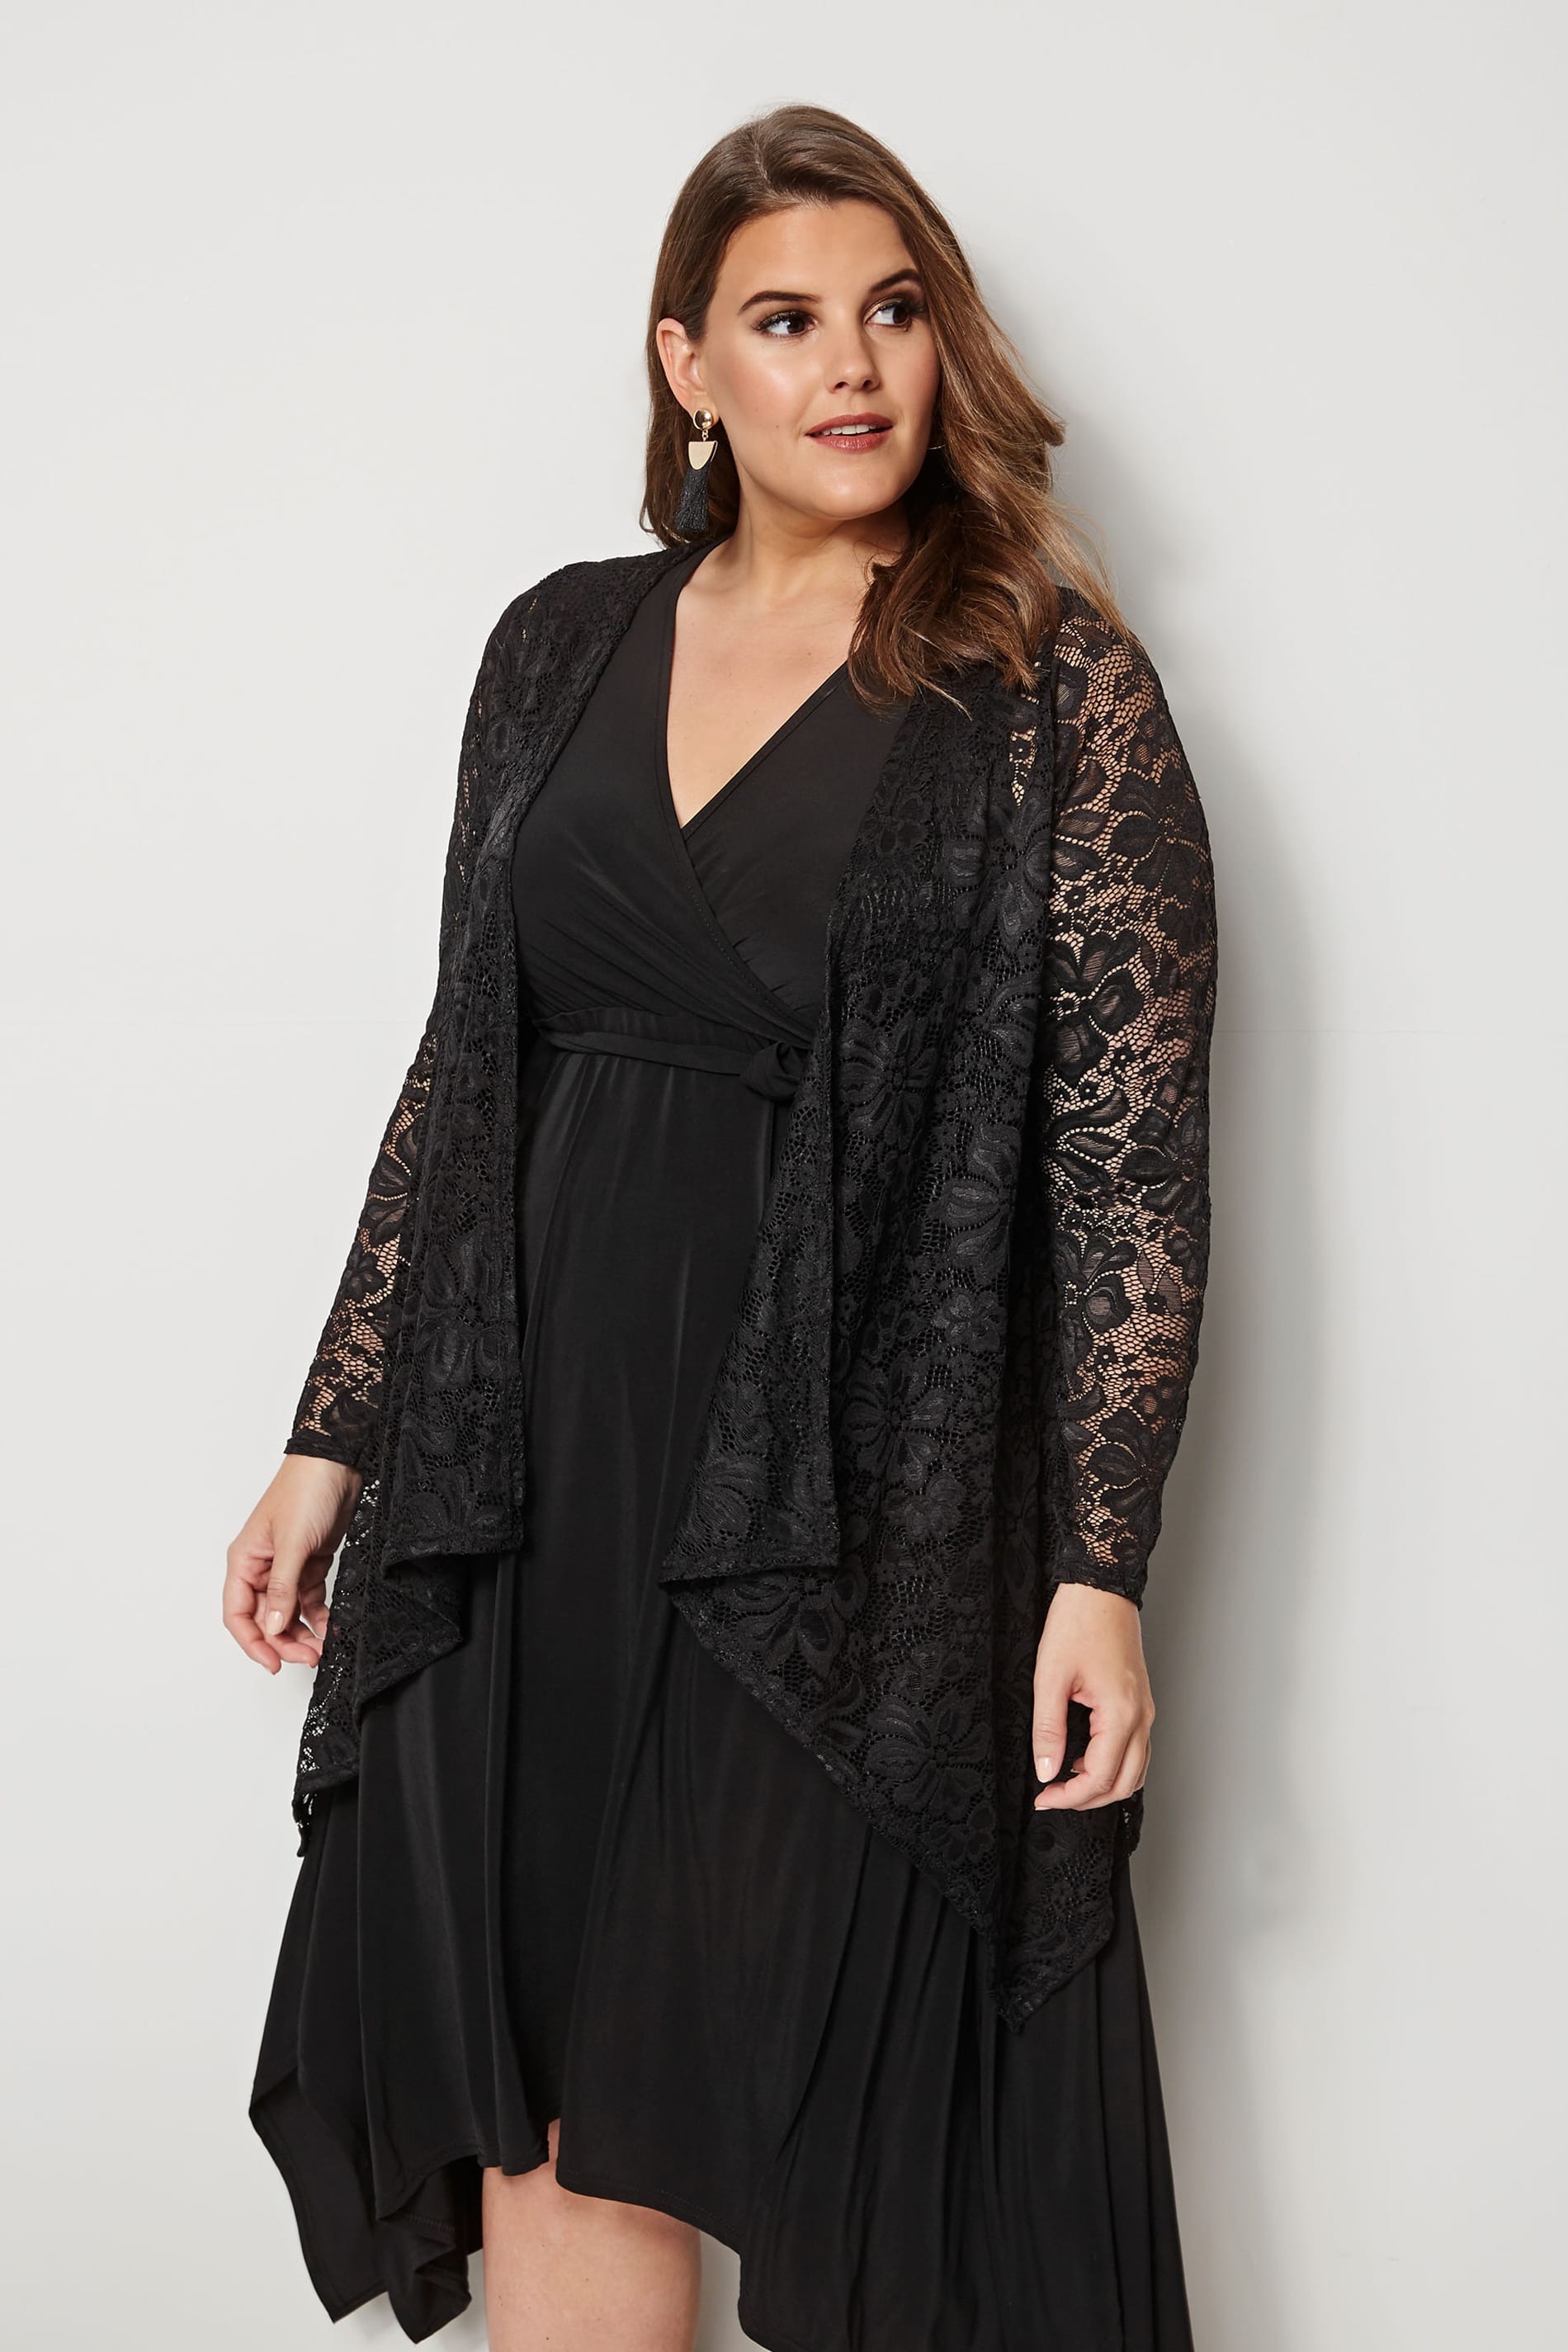 YOURS LONDON Black Floral Lace Cardigan, plus size 16 to 36